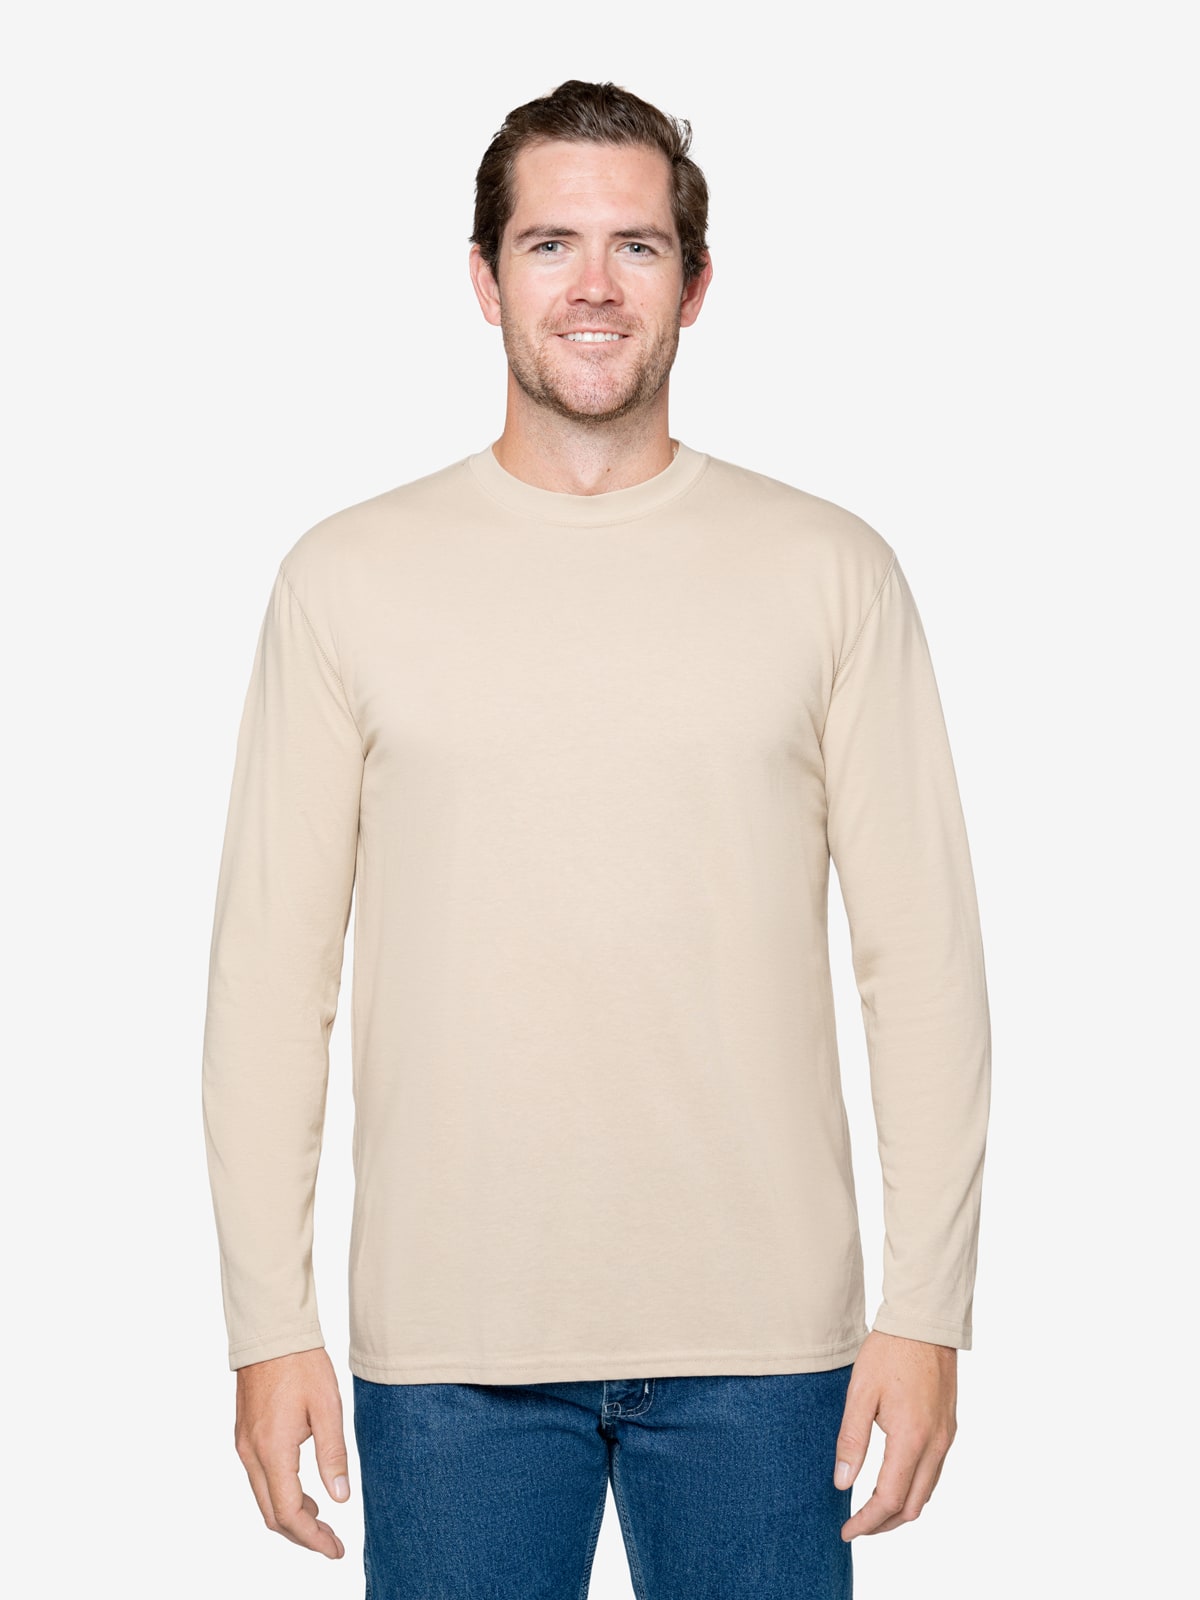 Insect Repellent Long Sleeve Wicking 